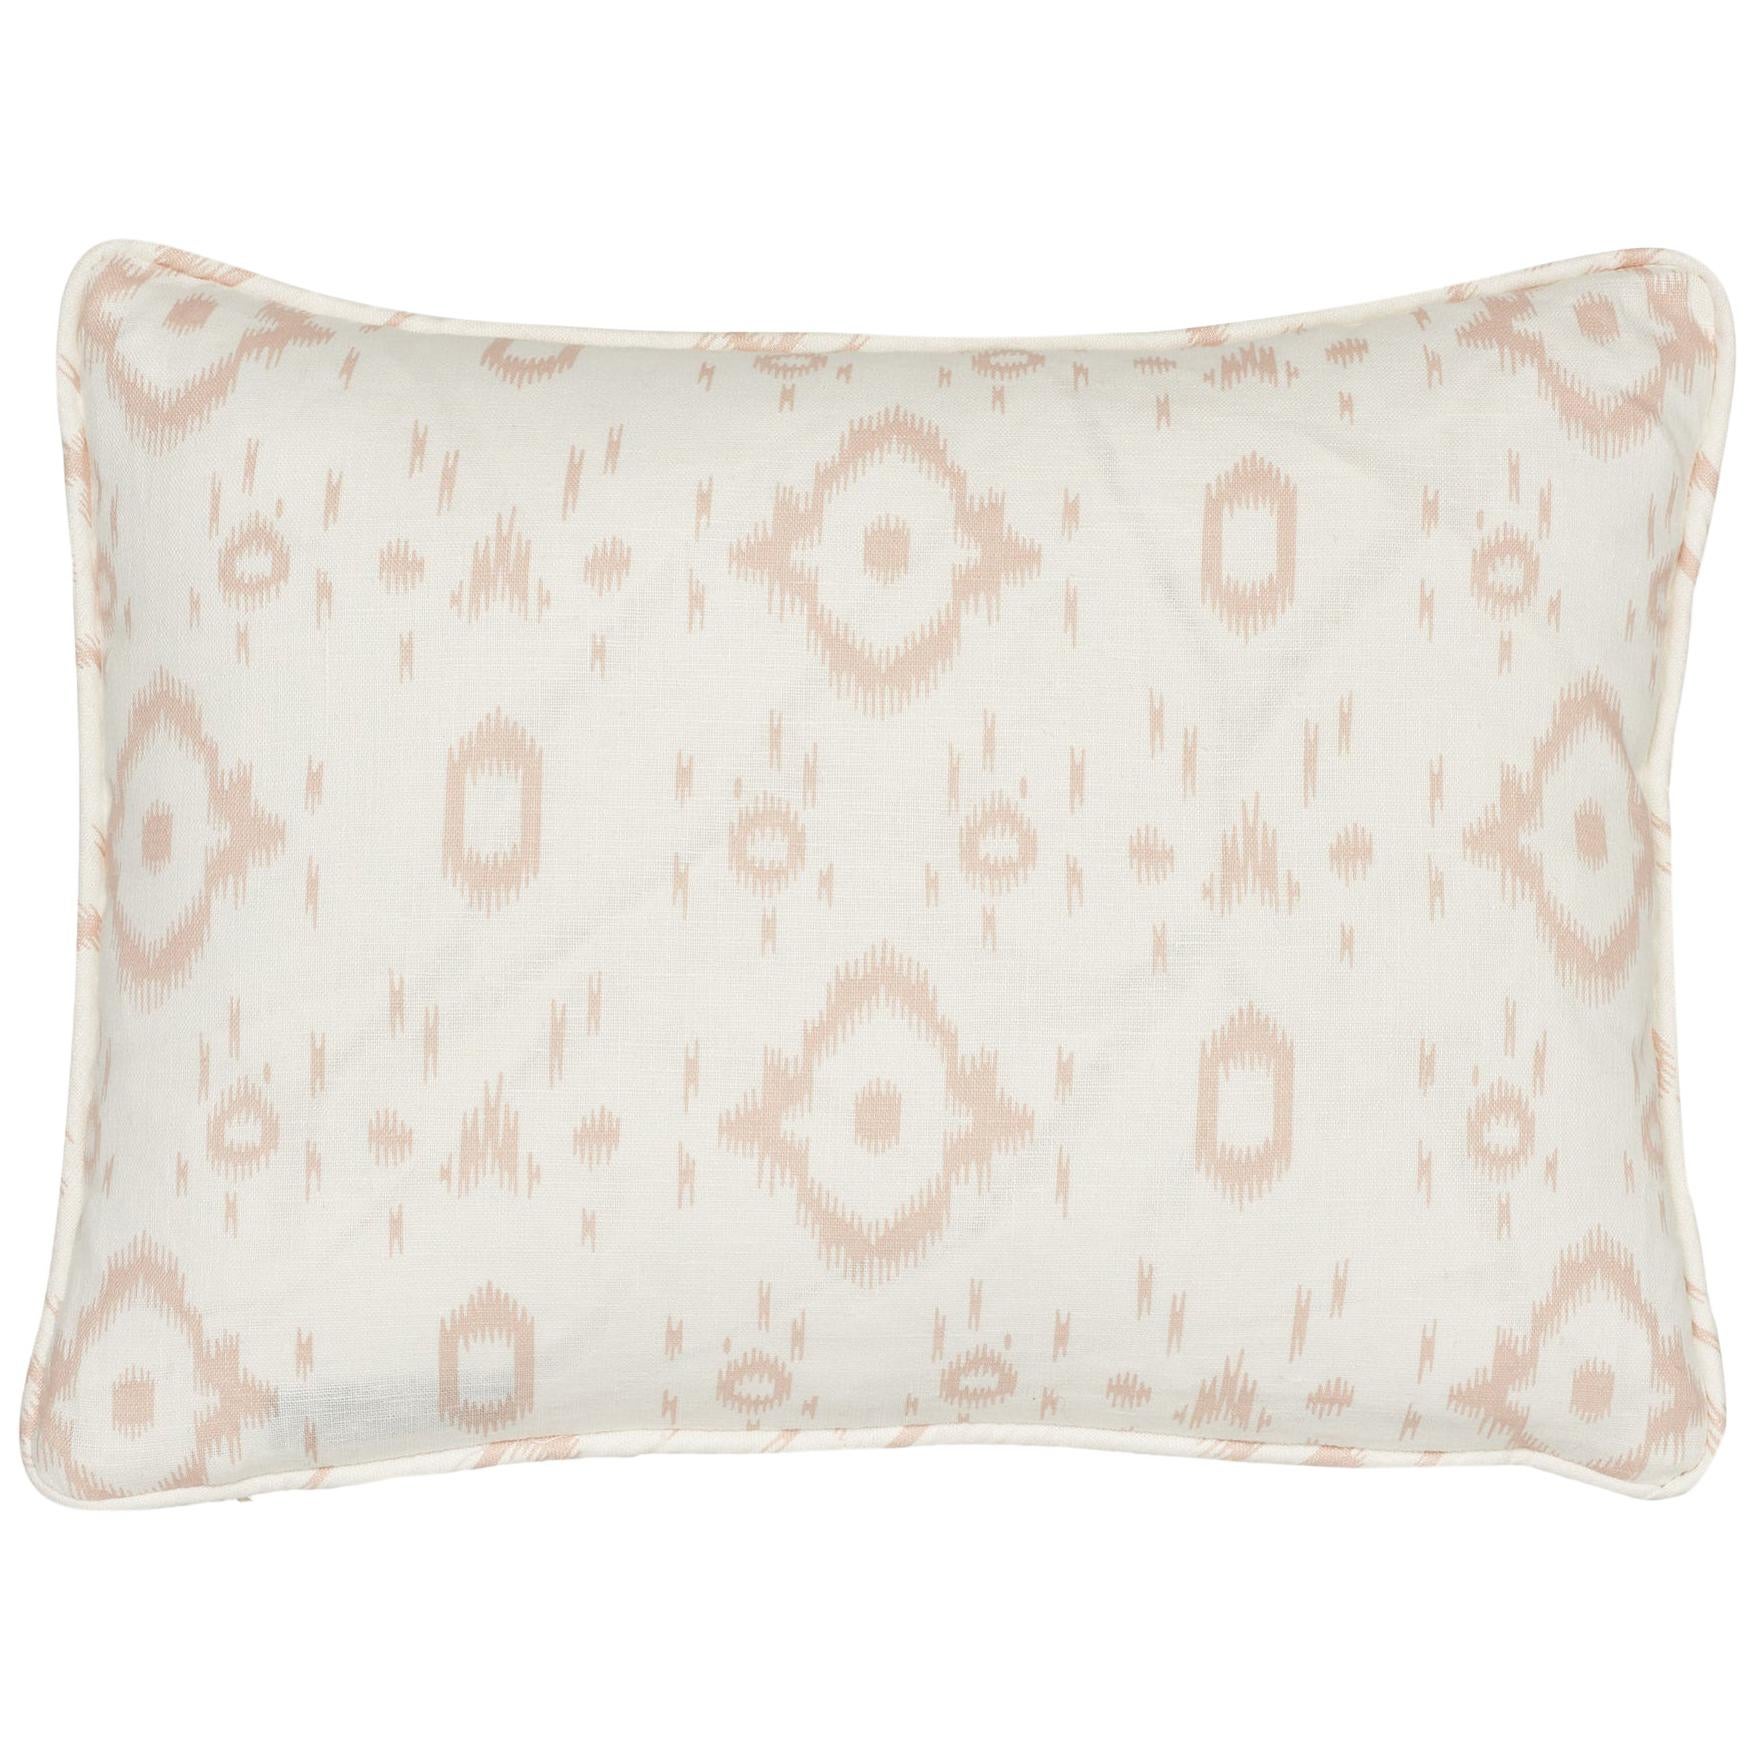 Schumacher x Veere Grenney Tabitha Quiet Pink Linen Two-Sided Pillow For Sale